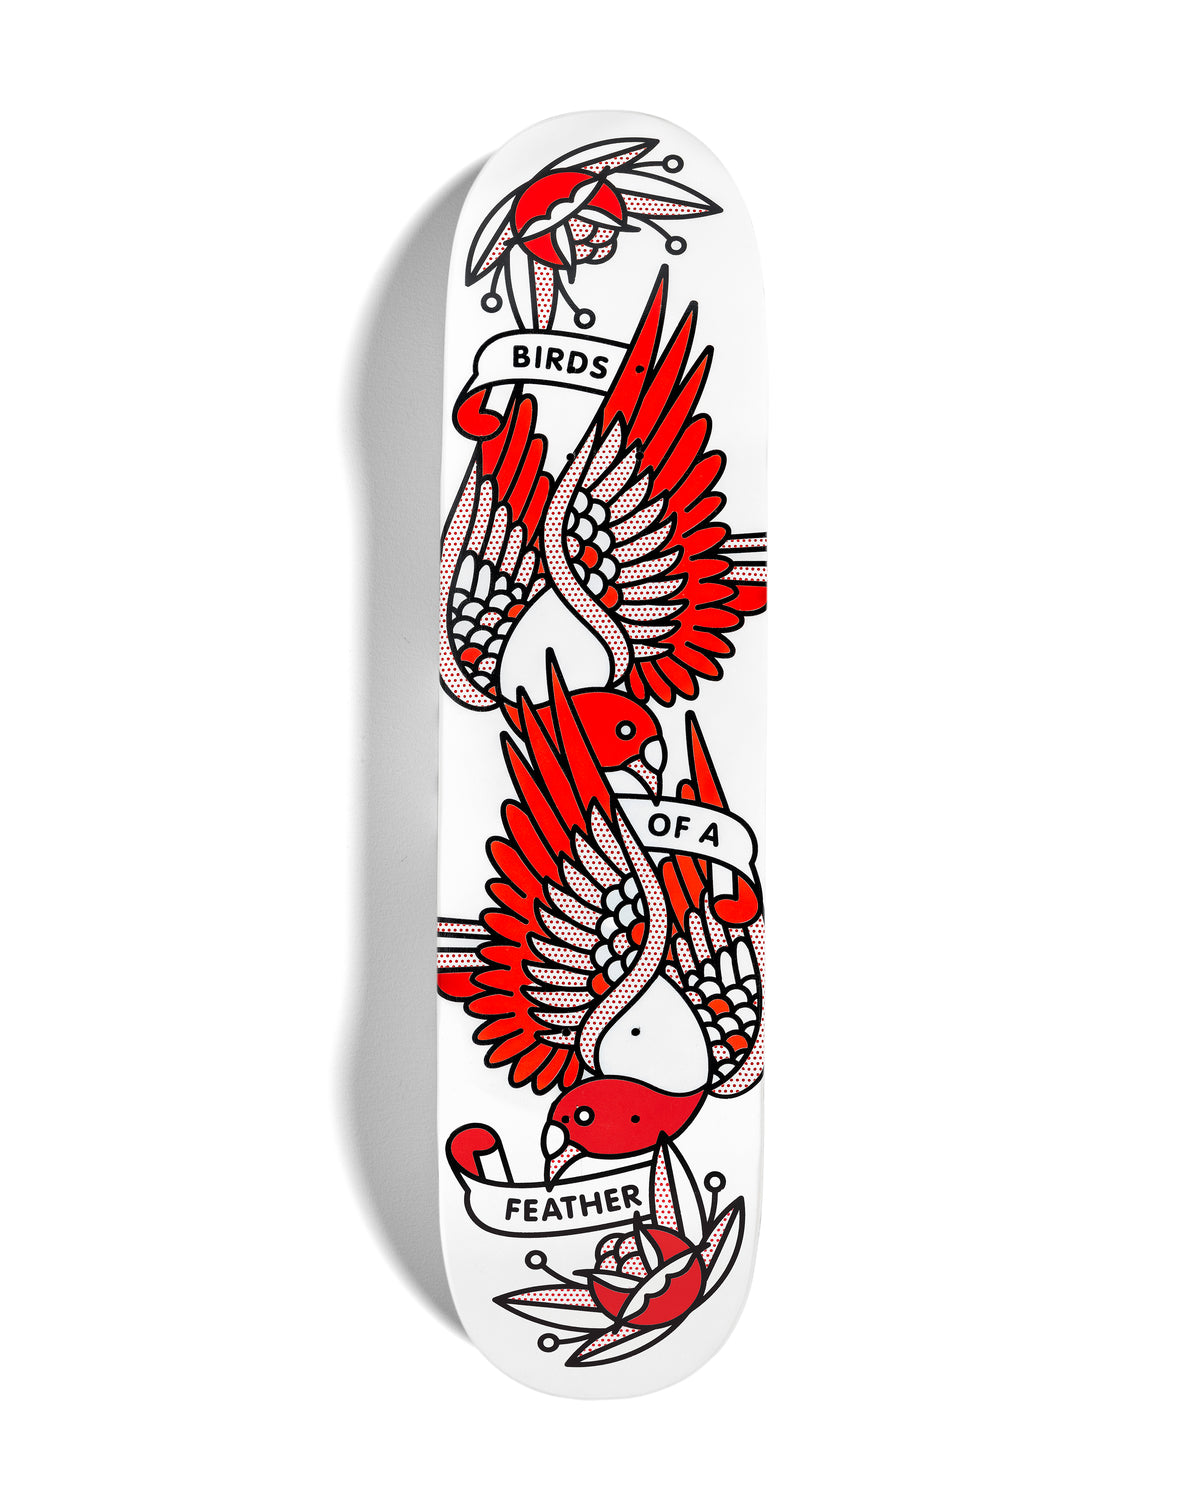 An original painting on a skateboard deck by the artist, Red Halftone. A vertical design of two lying pigeons with three banners that read: Birds of a feather. Roses bookend the top and bottom of the composition. Painted in a monoline and popart fusion style using a white, black and red color palette.